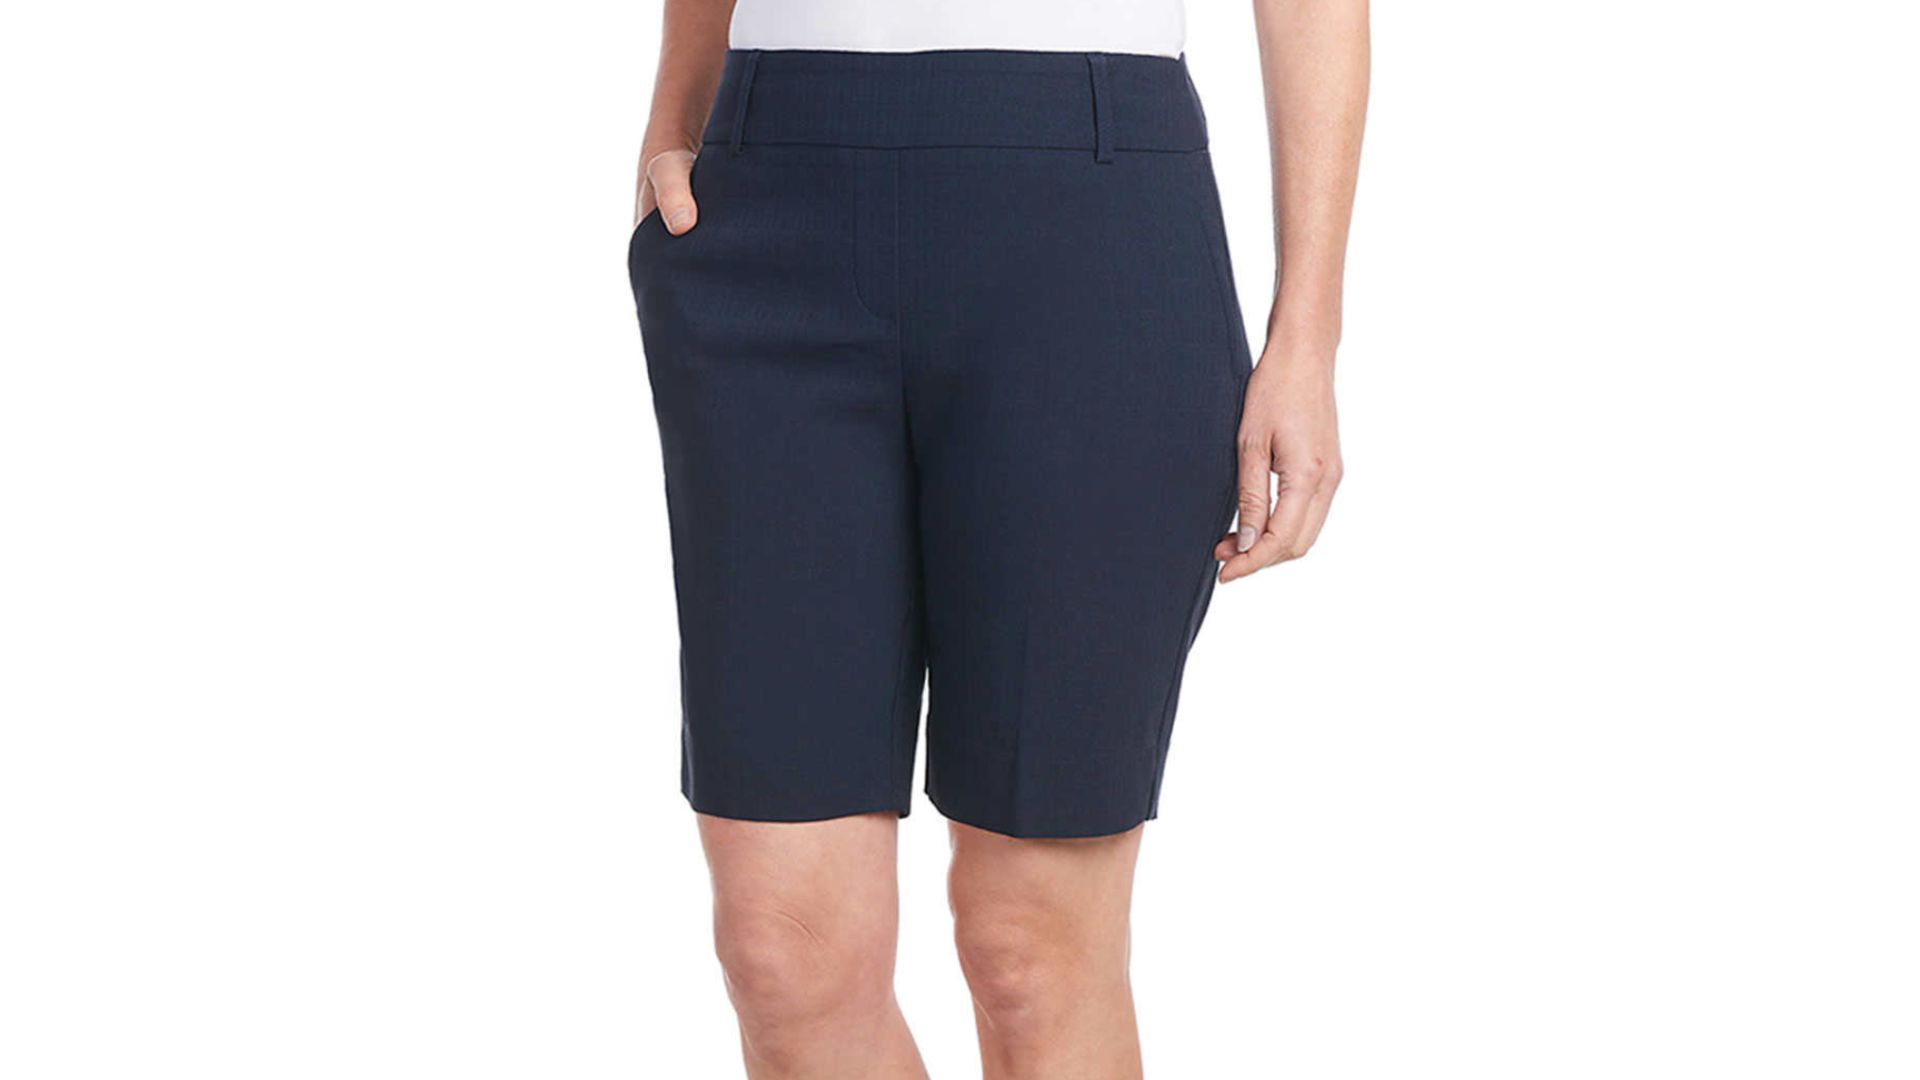 <ul> <li><strong>Price:</strong> <a href="https://www.costco.com/hilary-radley-ladies-bermuda-short.product.4000207691.html" rel="noreferrer noopener">$11.99</a></li> </ul> <p>If your existing bermudas are wearing out or you don't have any in your closet at all, it's time to shop for a pair of Hilary Radley ladies' Bermuda shorts. Costco members receive $2 off the original price of $13.99.</p> <p>Each pair of bermudas has faux back welt pockets, side slits and belt loops to pair with your favorite belt. Color options include black, navy and tan and there are several women's sizes available to shop for your perfect fit.</p>